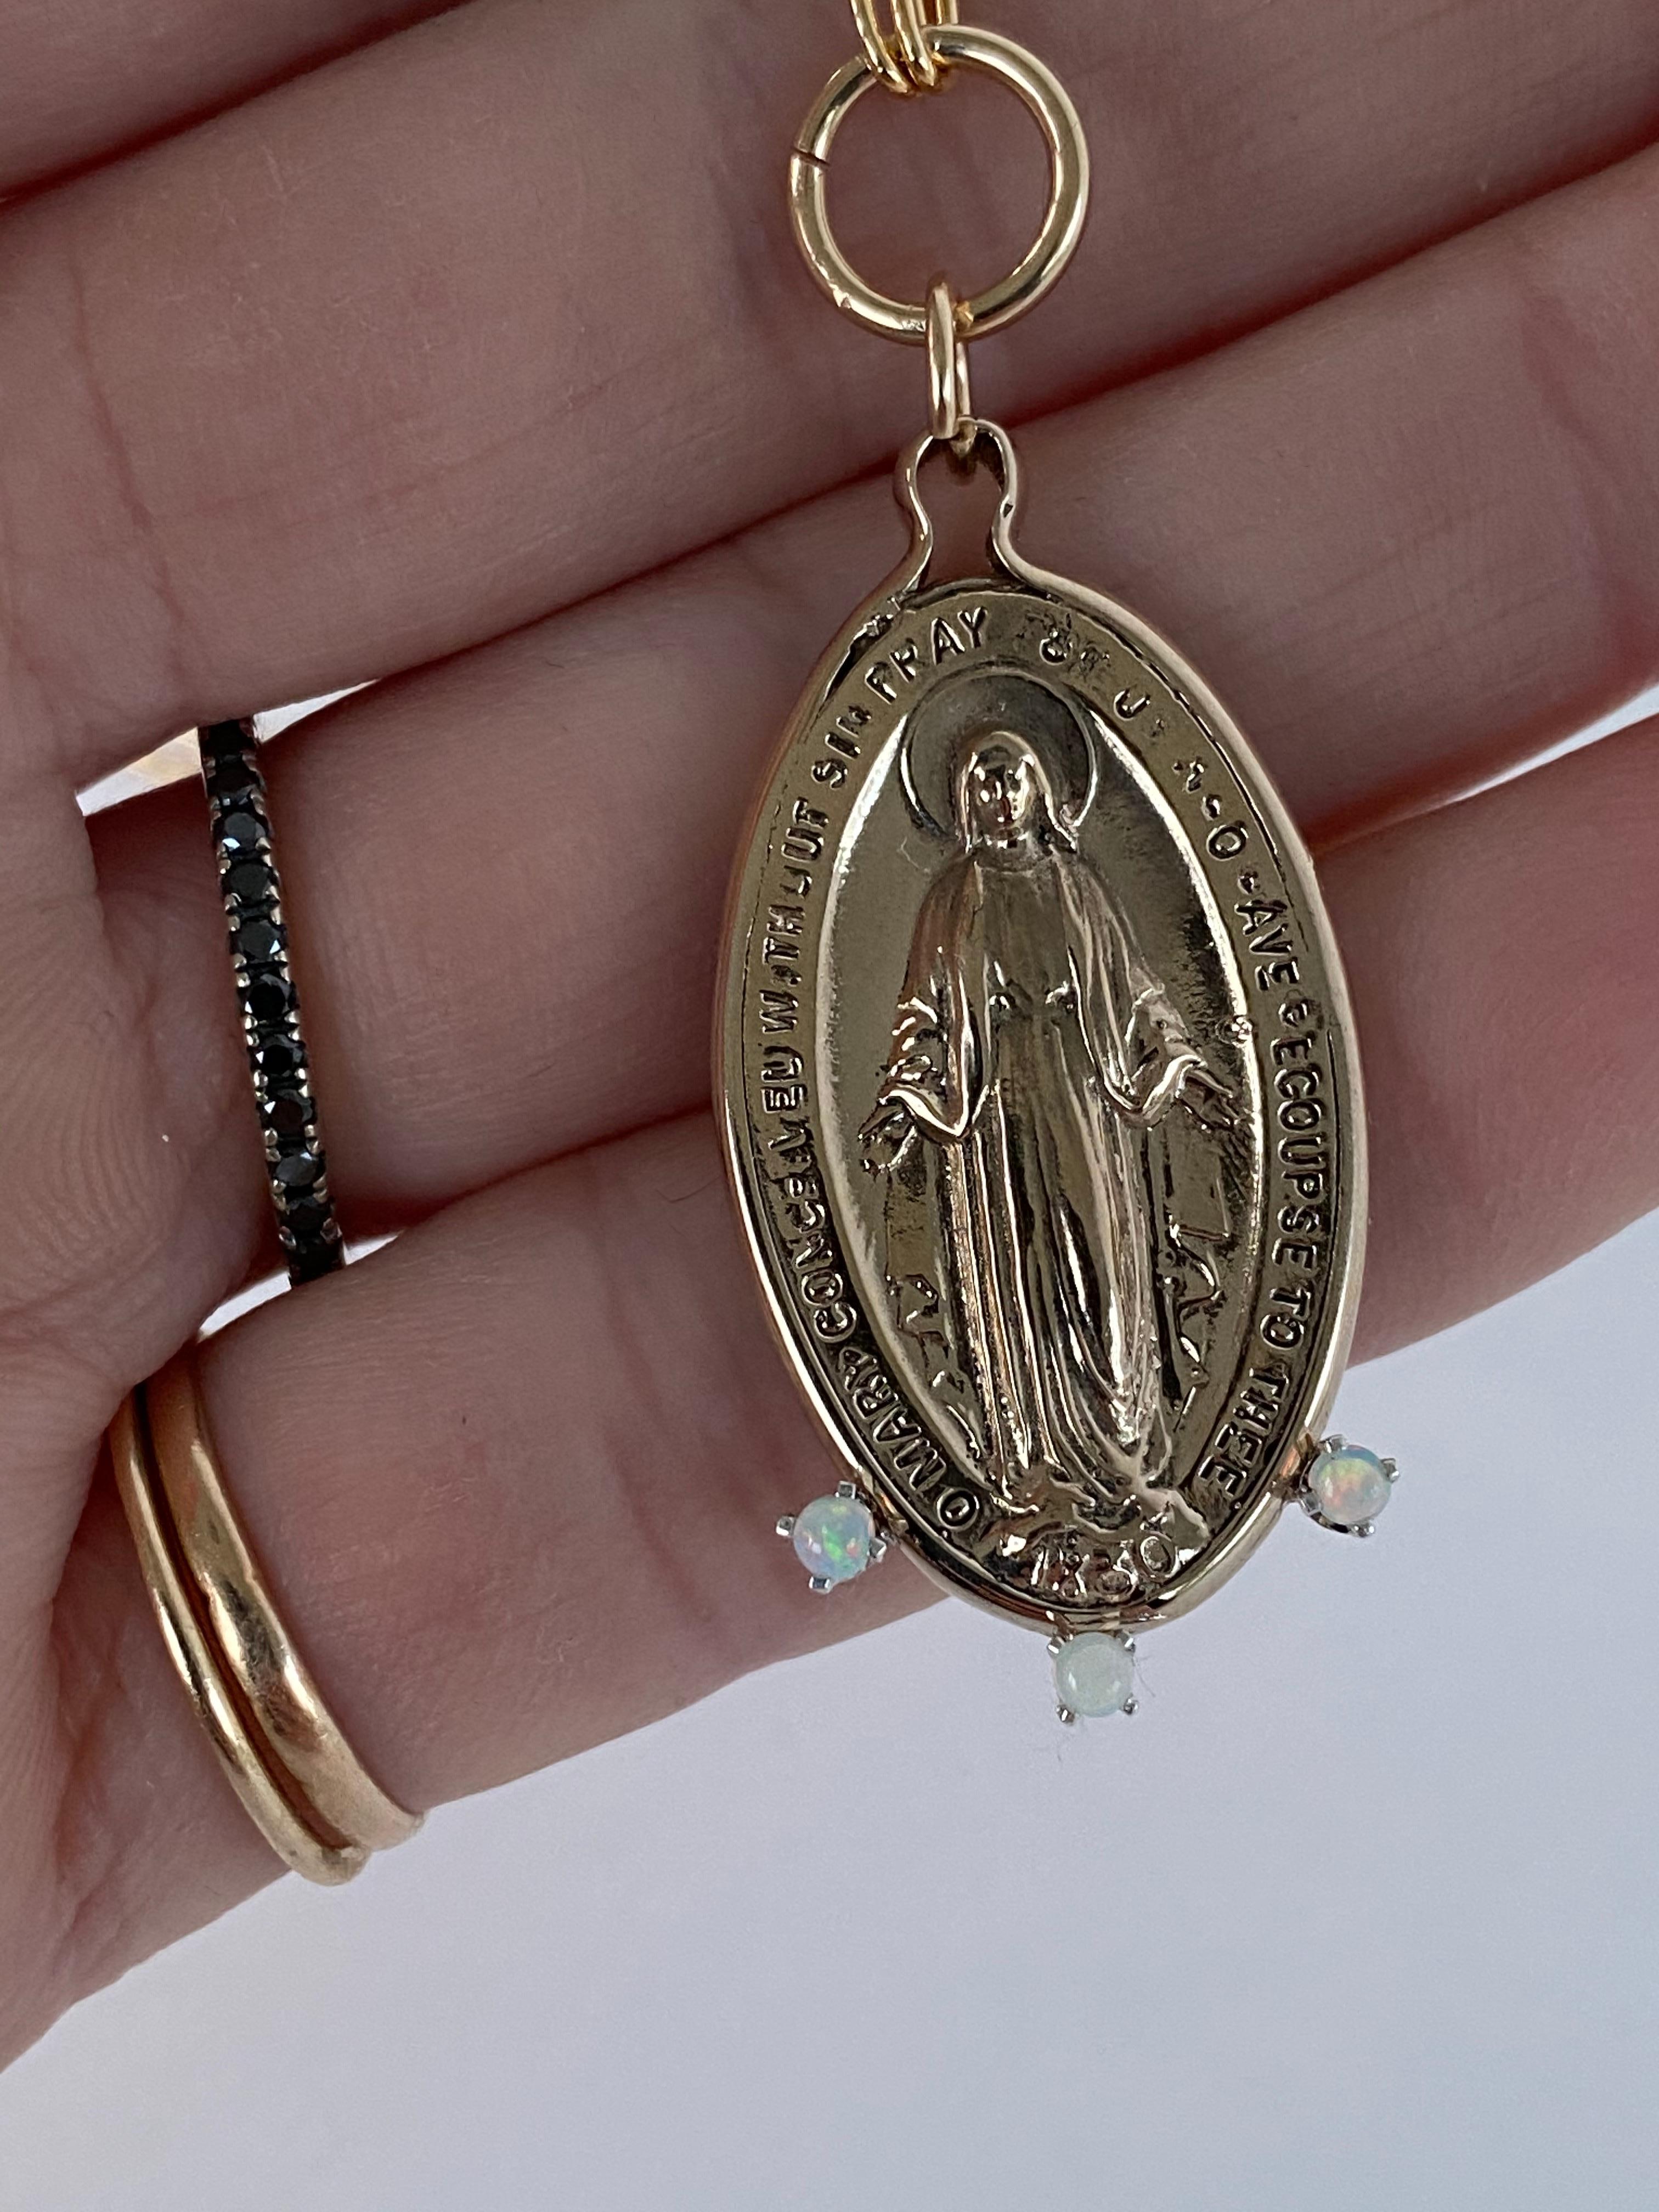 Virgin Mary Miraculous Medal Oval Coin Pendant Opal Bronze Chain Necklace J Dauphin

Exclusive piece with Virgin Mary Miraculous Medal pendant with 3 Opals. The Chain is 23' long but can be made shorter or longer on request.

This item is called